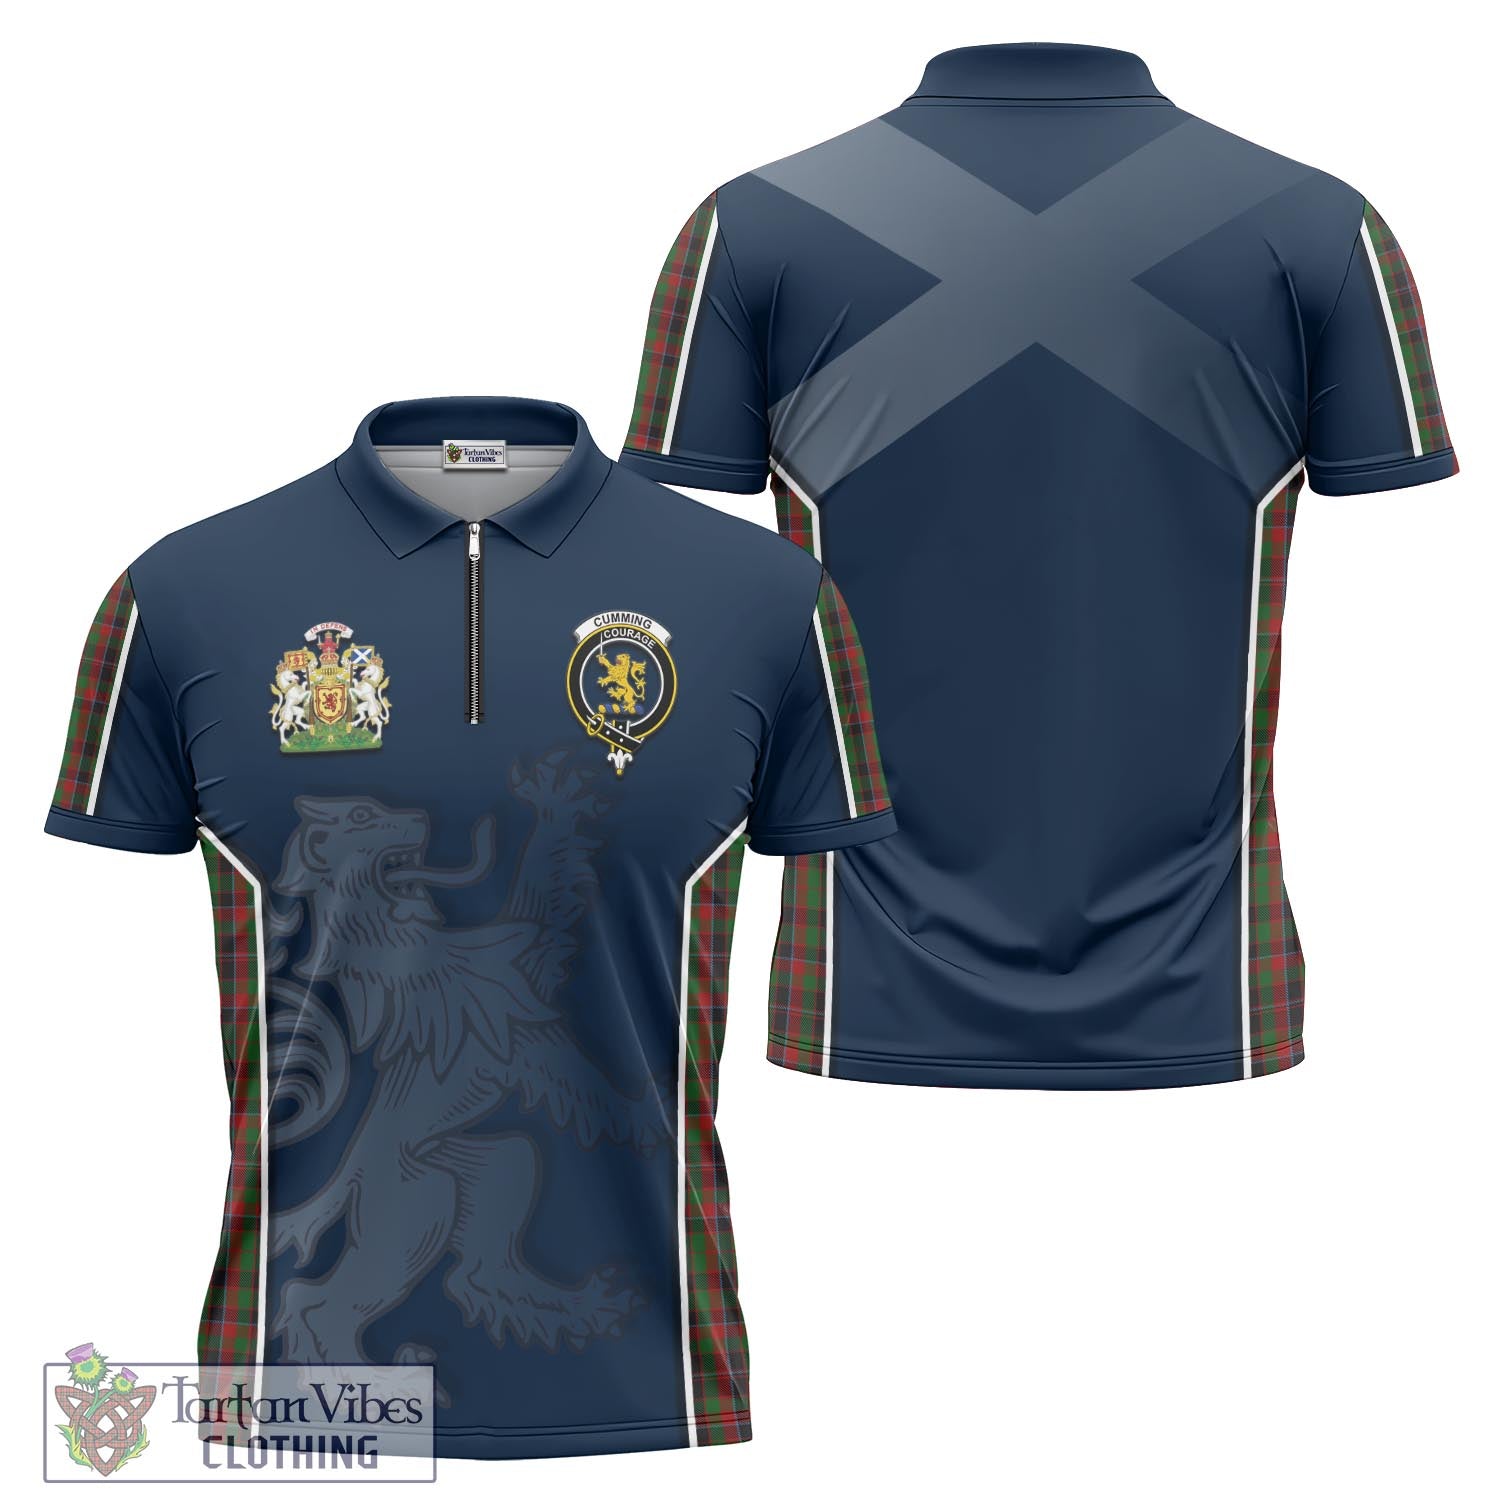 Tartan Vibes Clothing Cumming Hunting Tartan Zipper Polo Shirt with Family Crest and Lion Rampant Vibes Sport Style